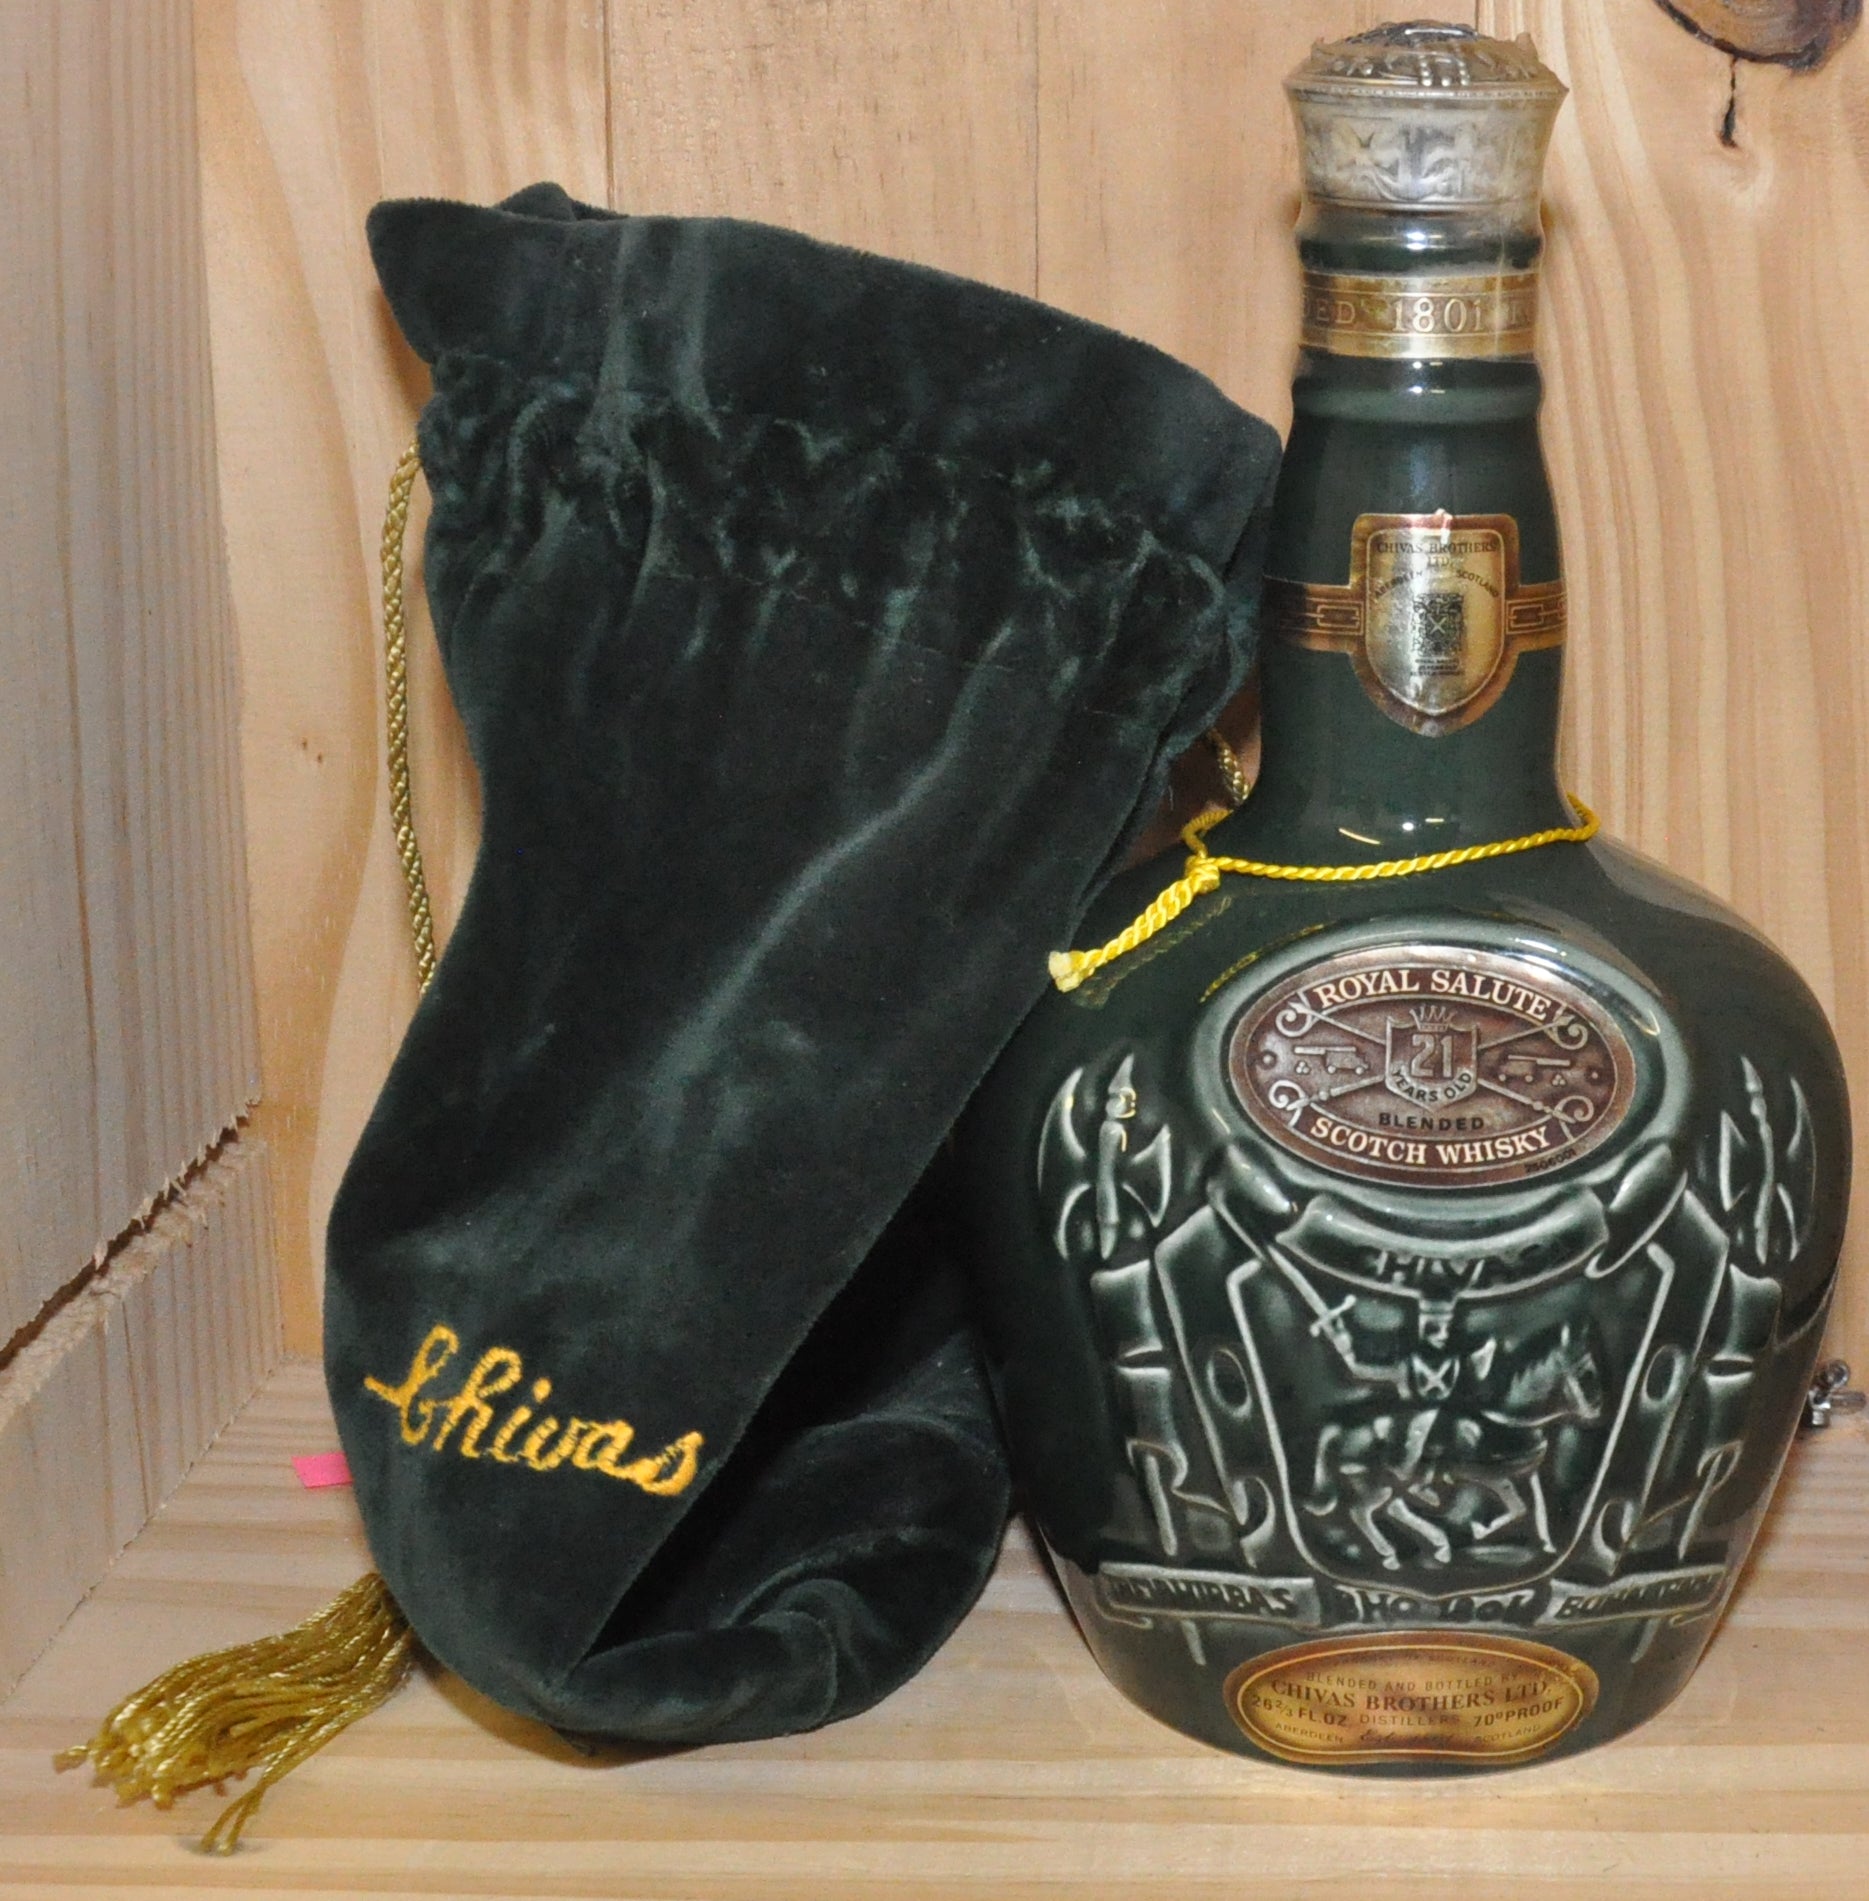 Chivas Regal - Royal Salute - 21 year old 40% vol - 70cl - Whiskey